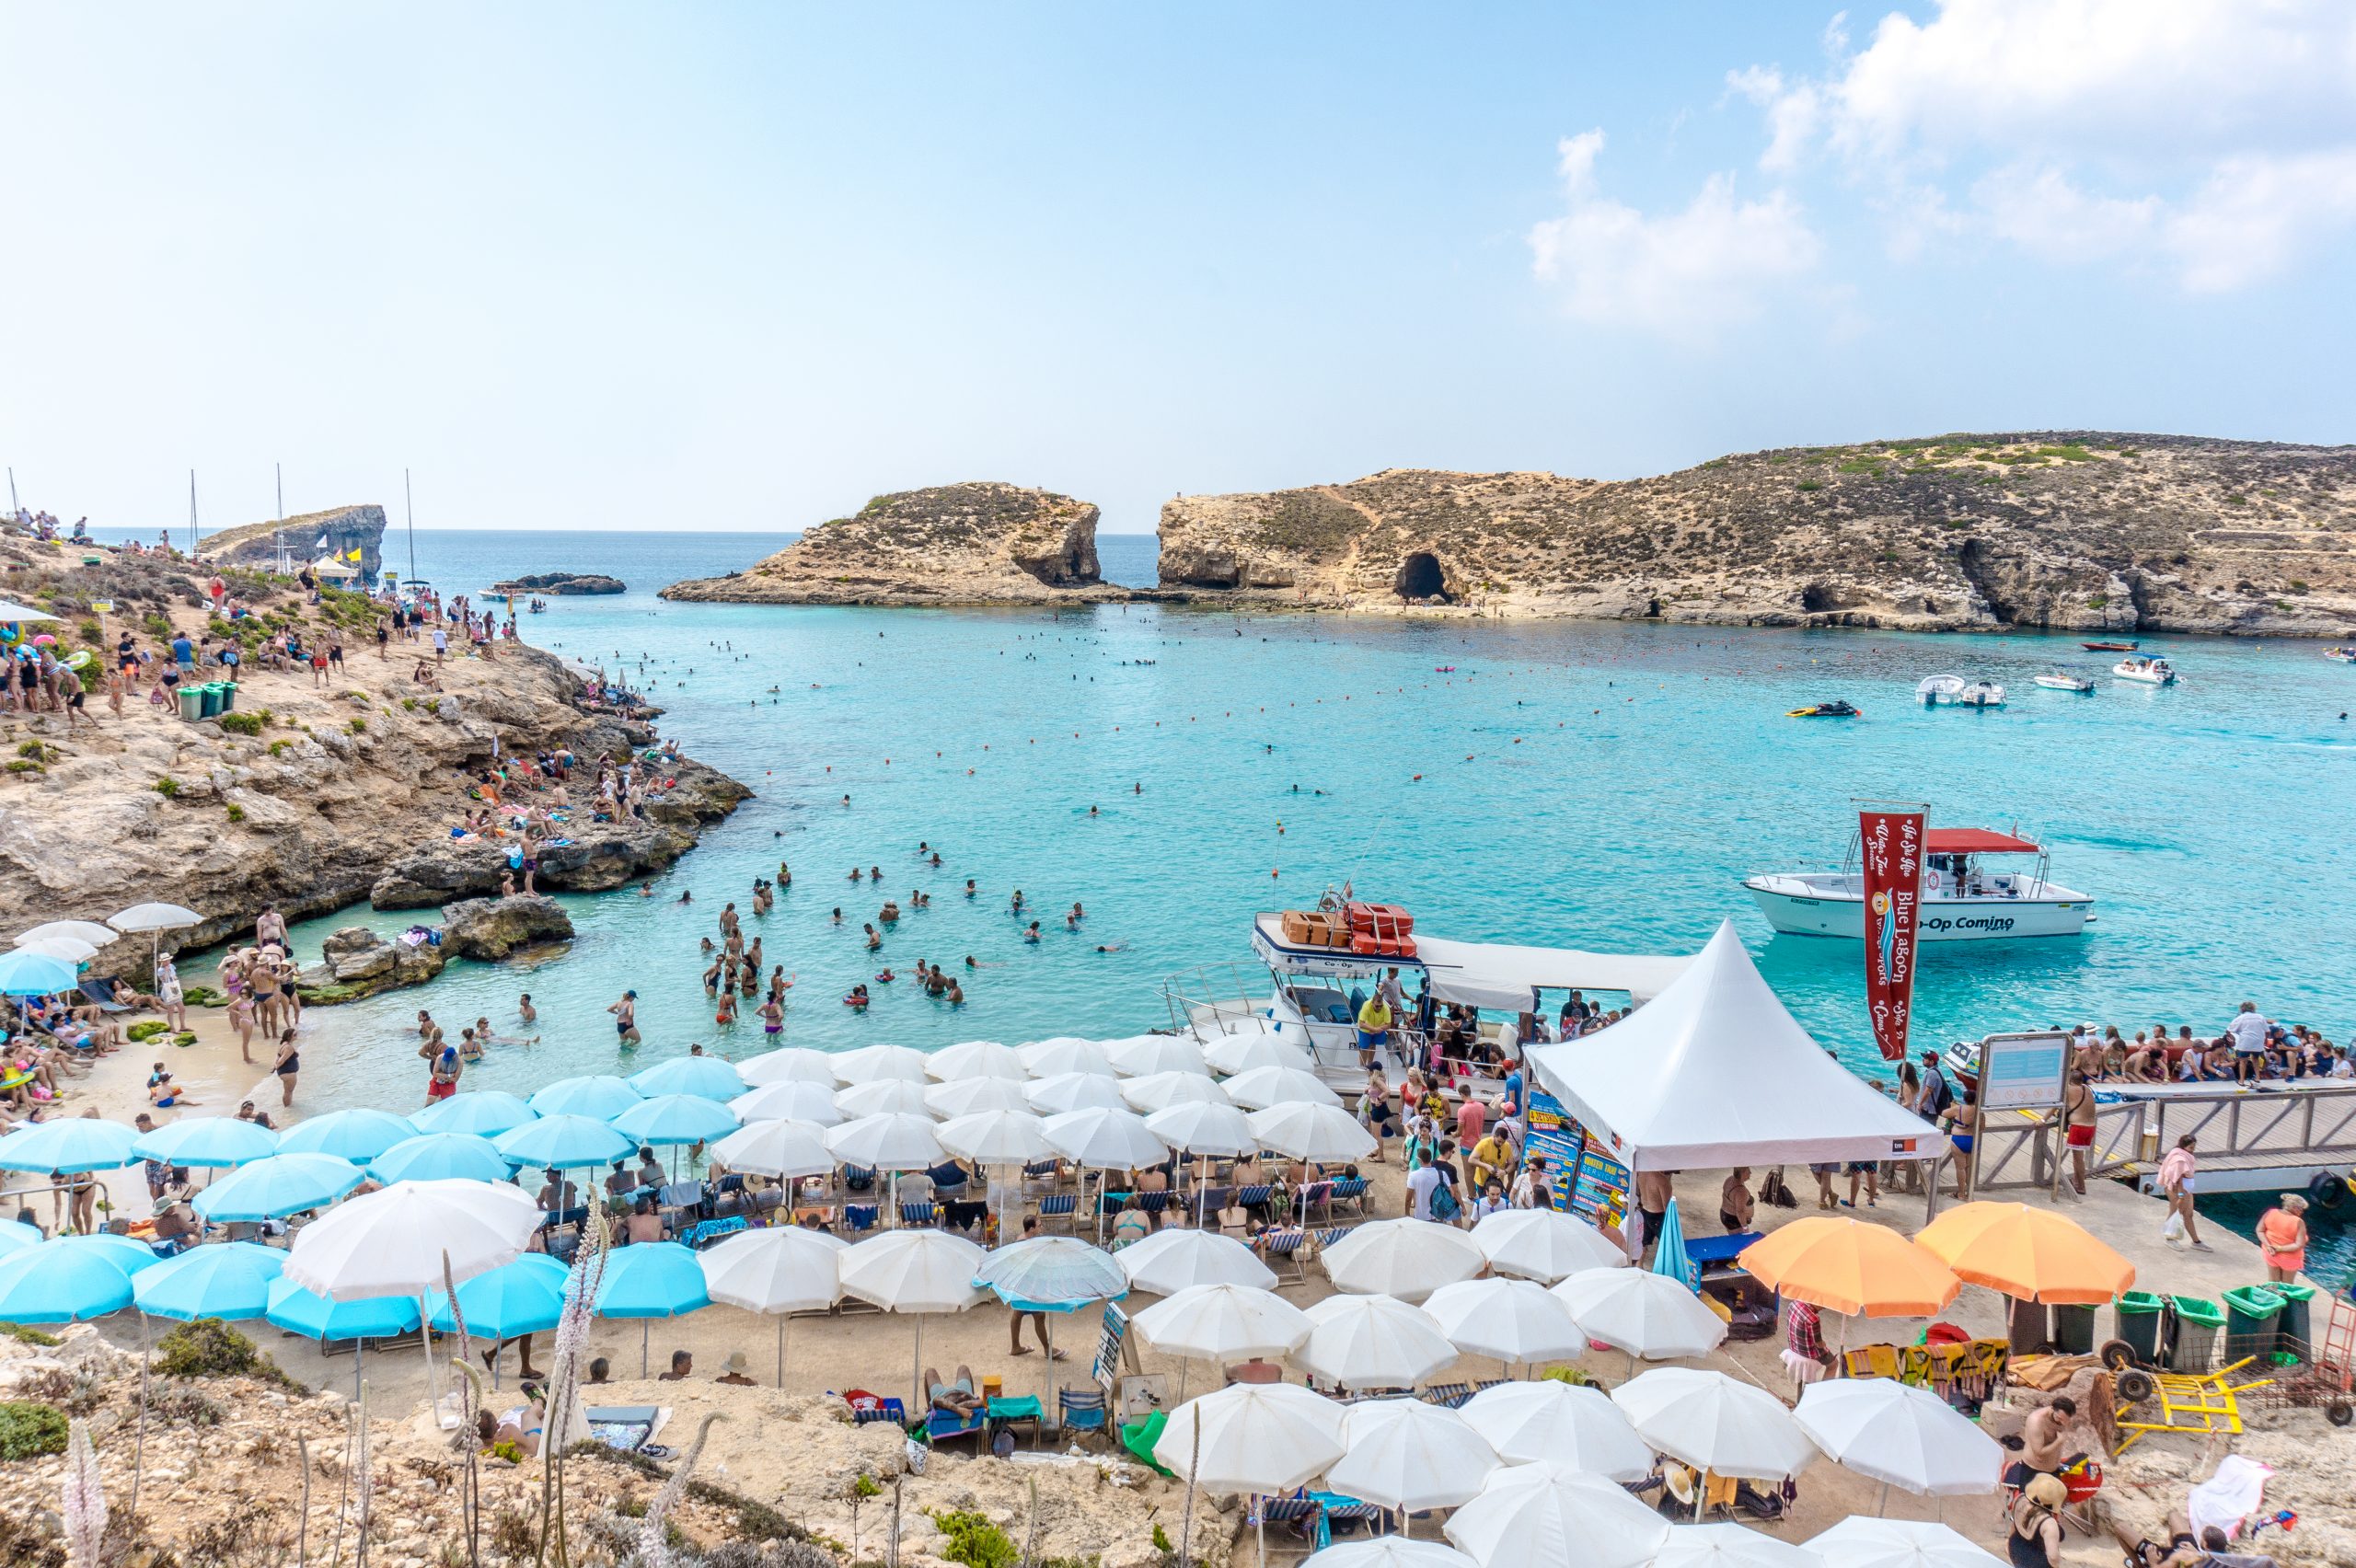 The best way to visit the Blue Lagoon and Gozo